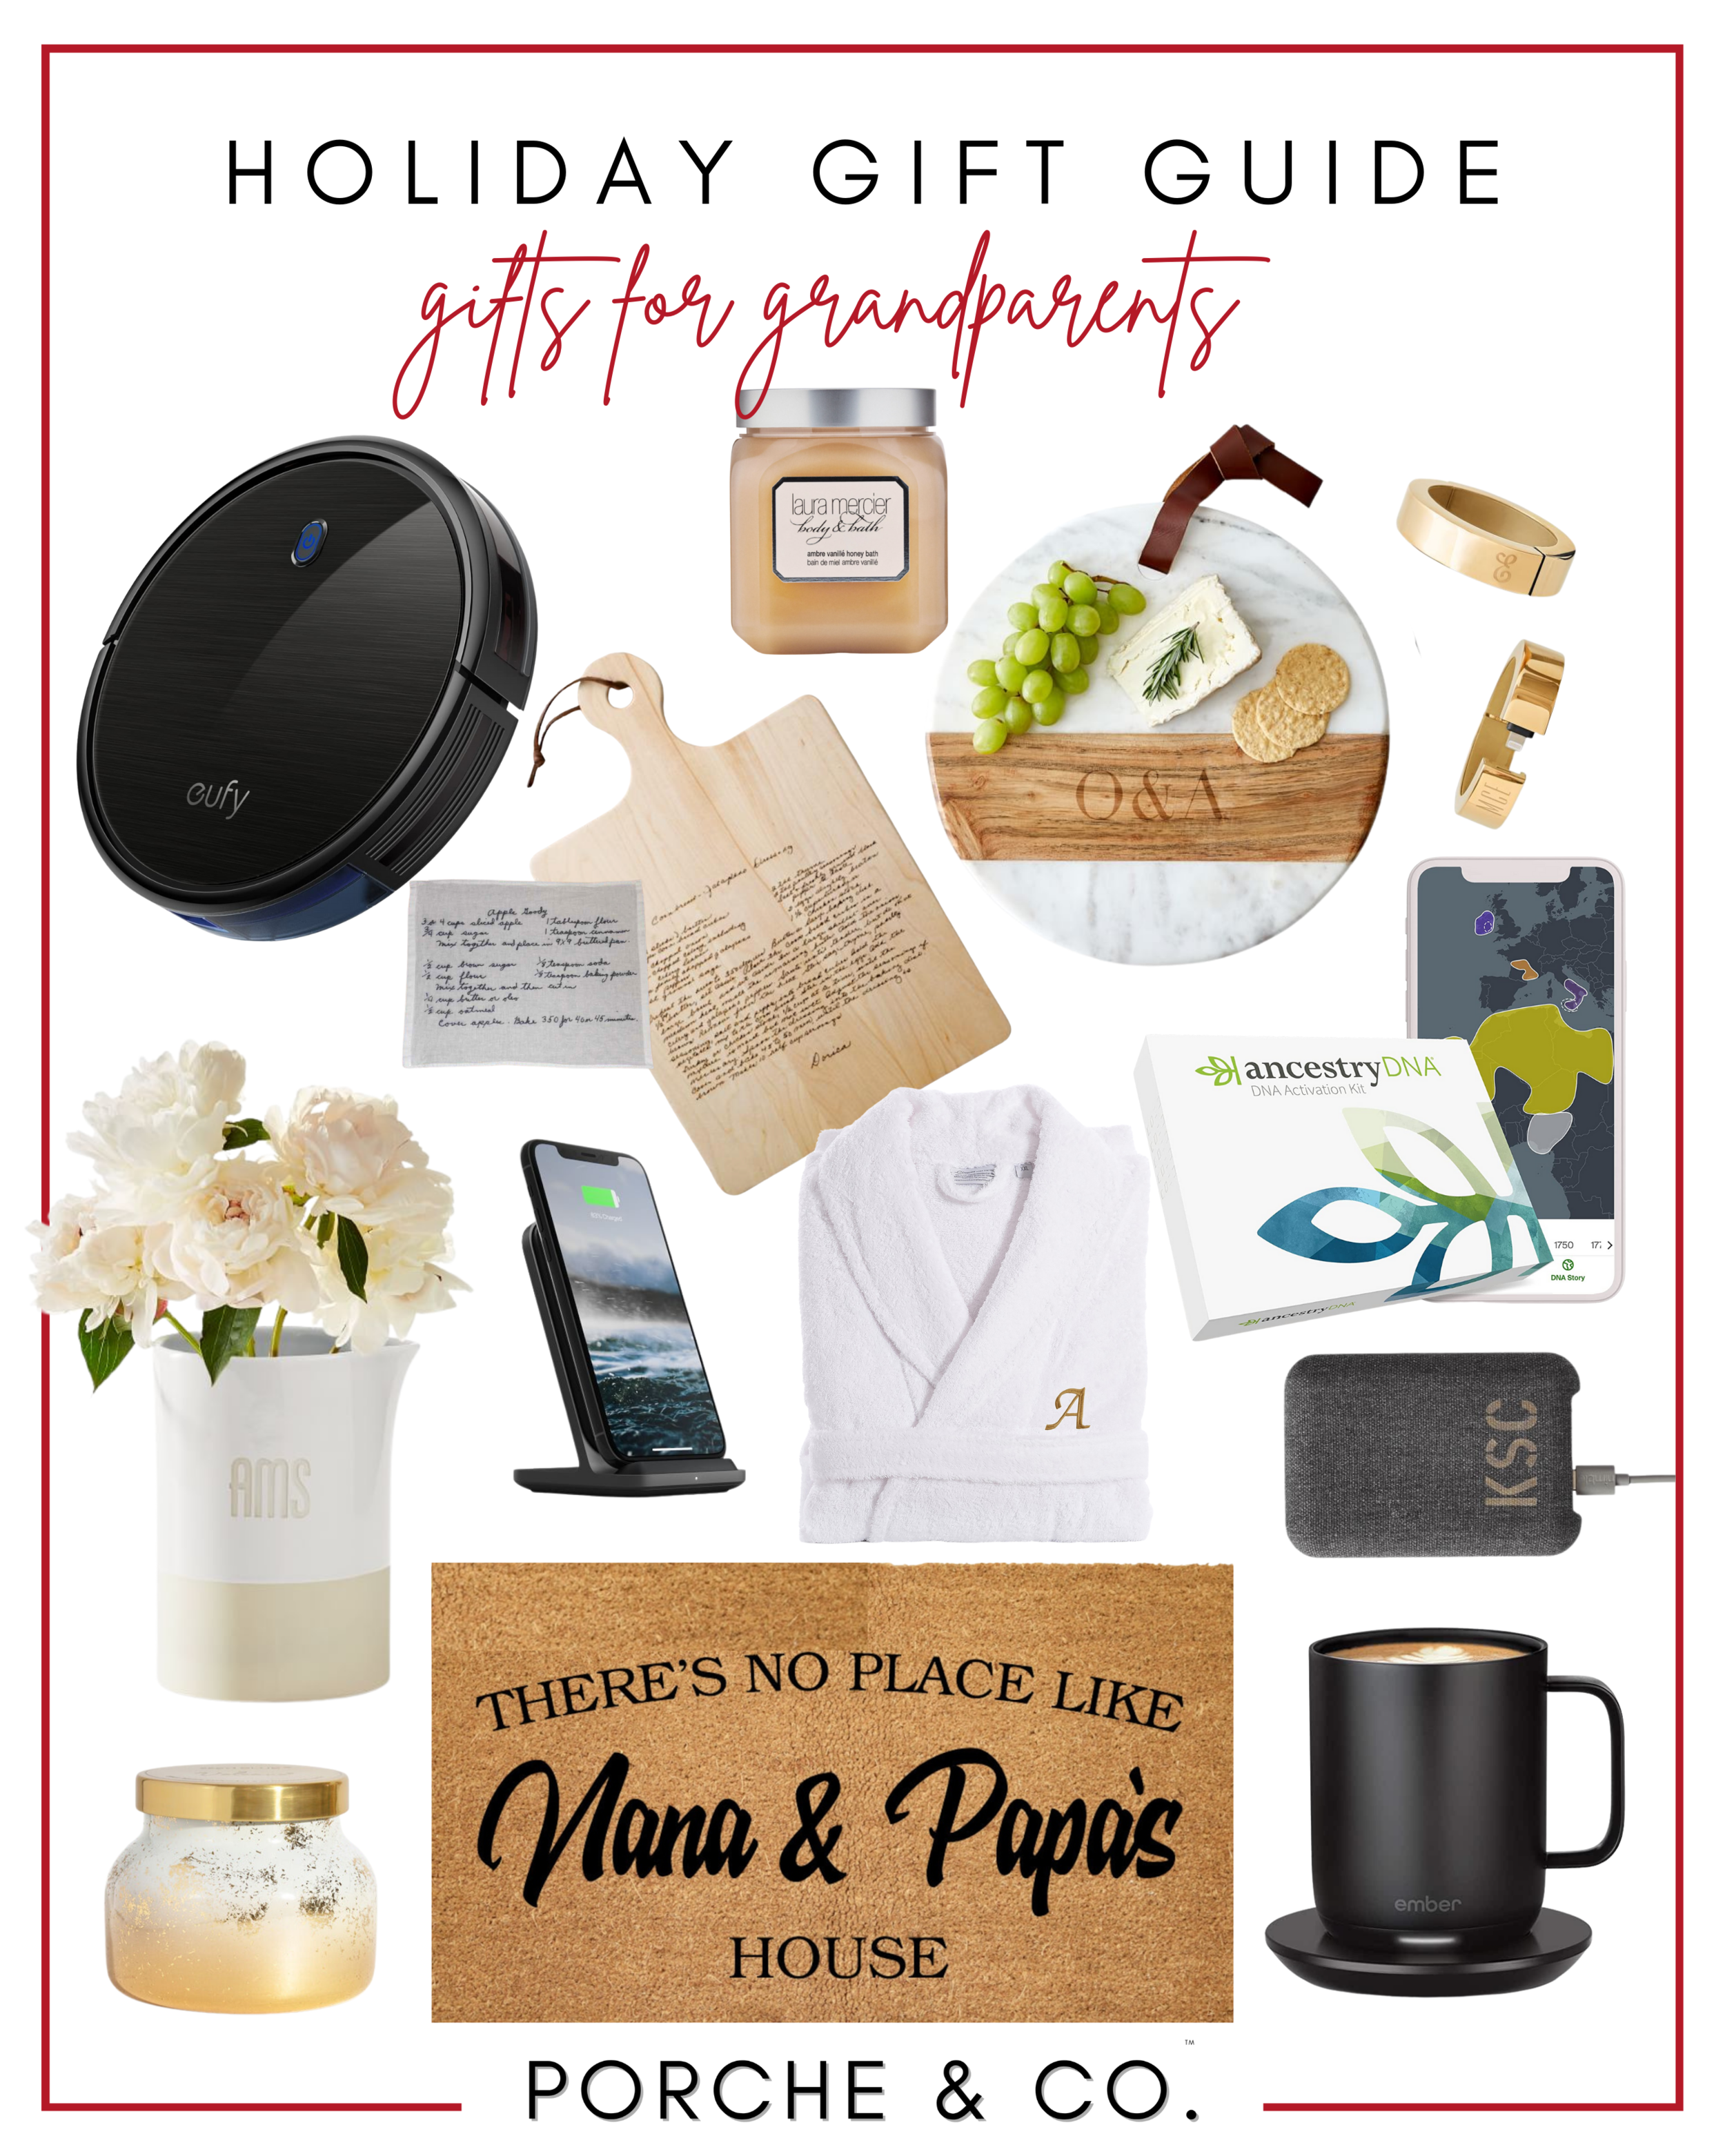 gifts for grandparents (Copy) (Copy)